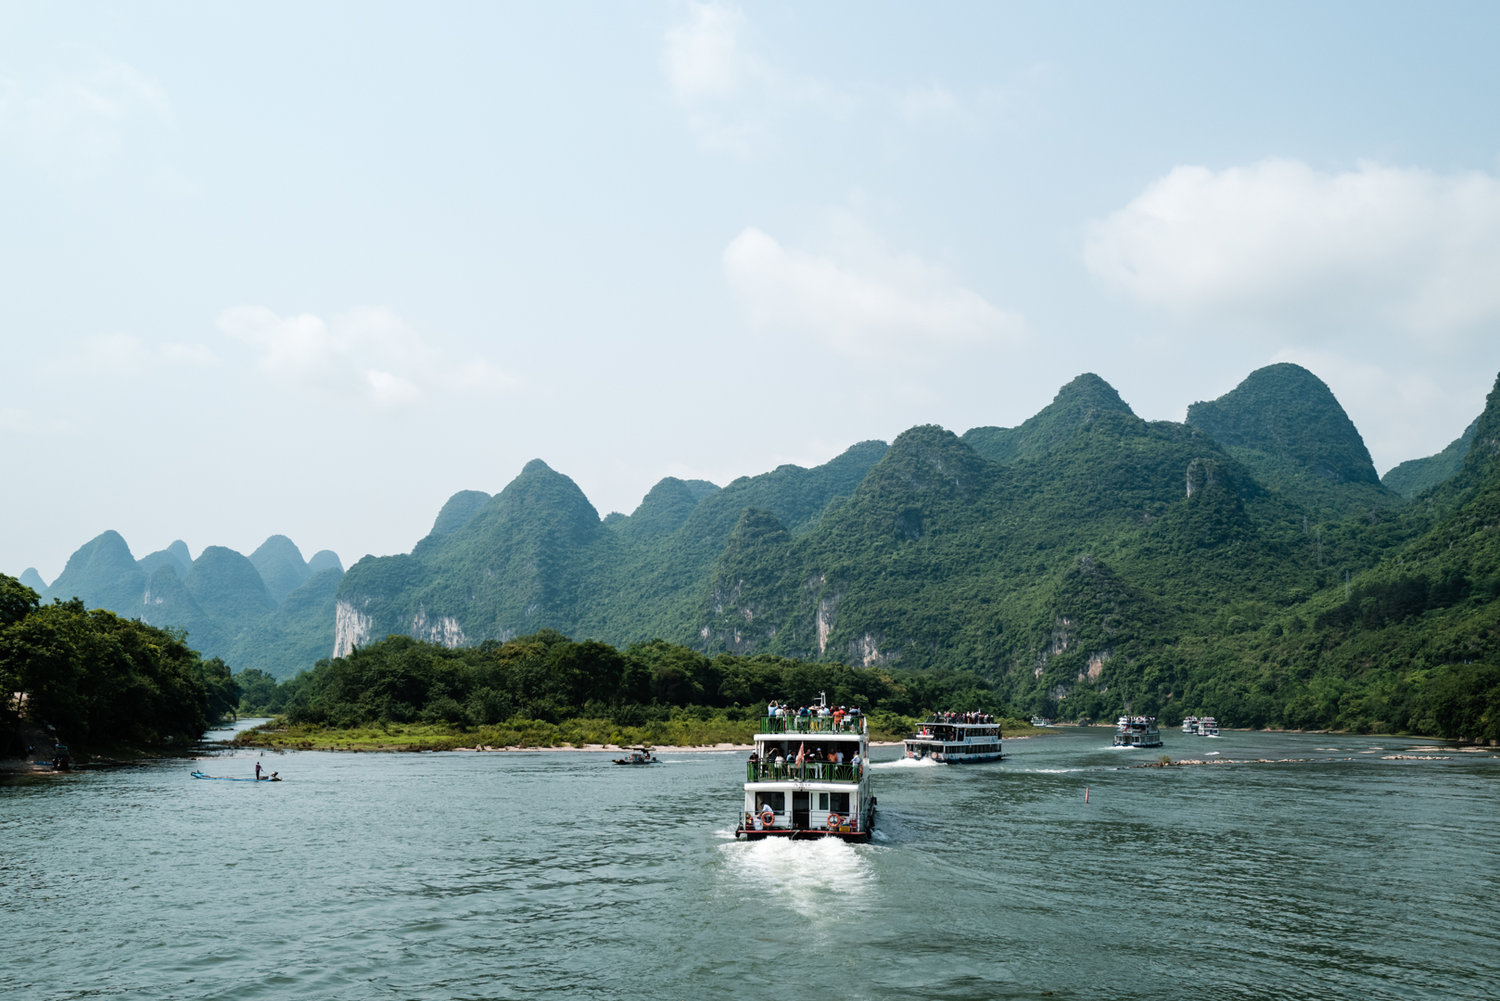 The Li River: A Remarkable Journey Down The Historic Waters Of China